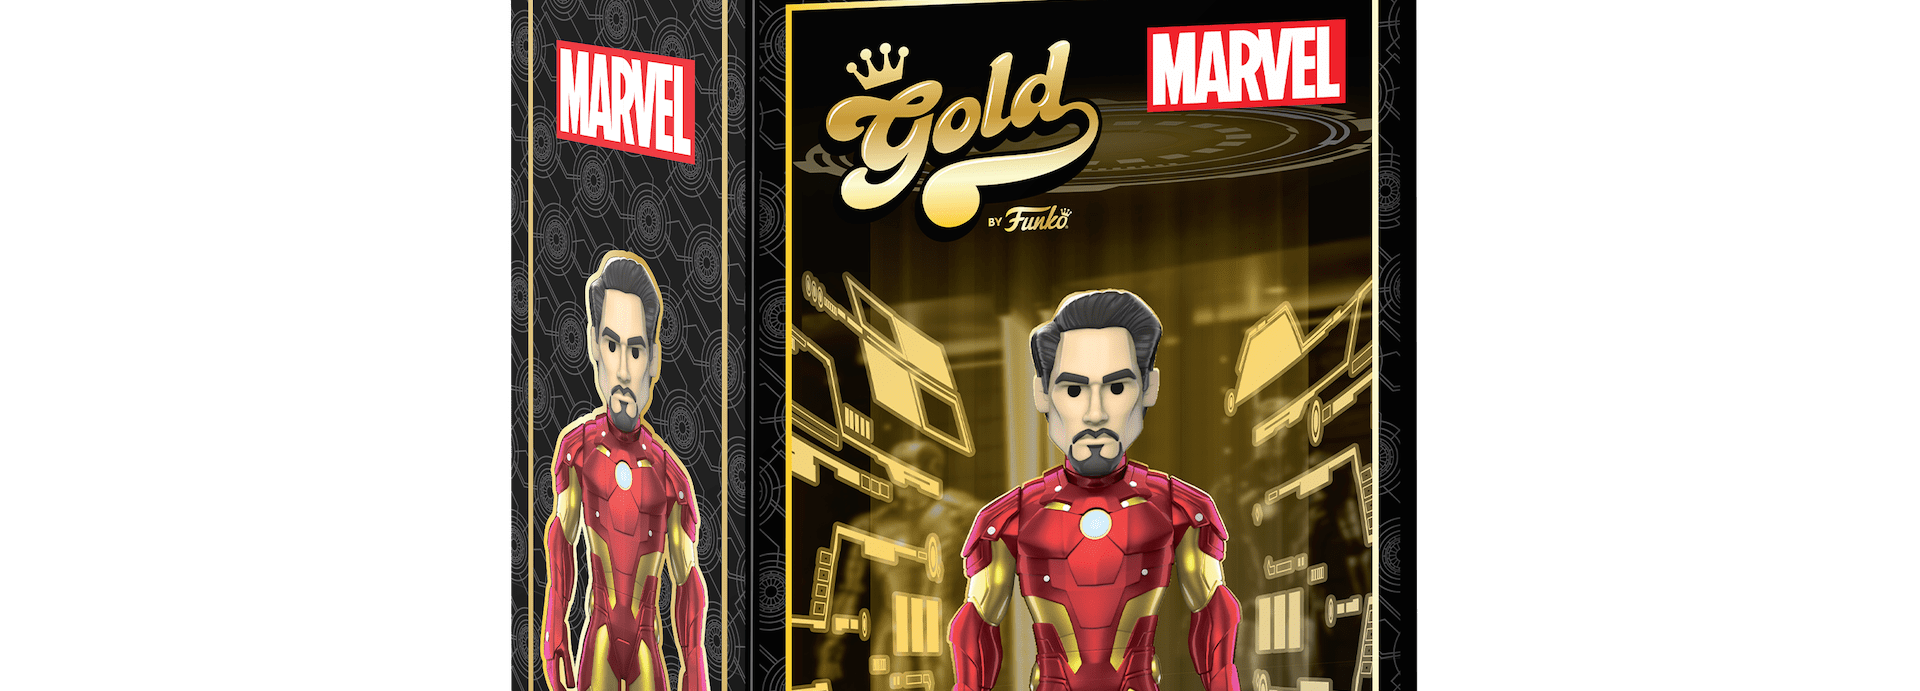 Funko and Marvel collaborate on collectible physical and NFT figure